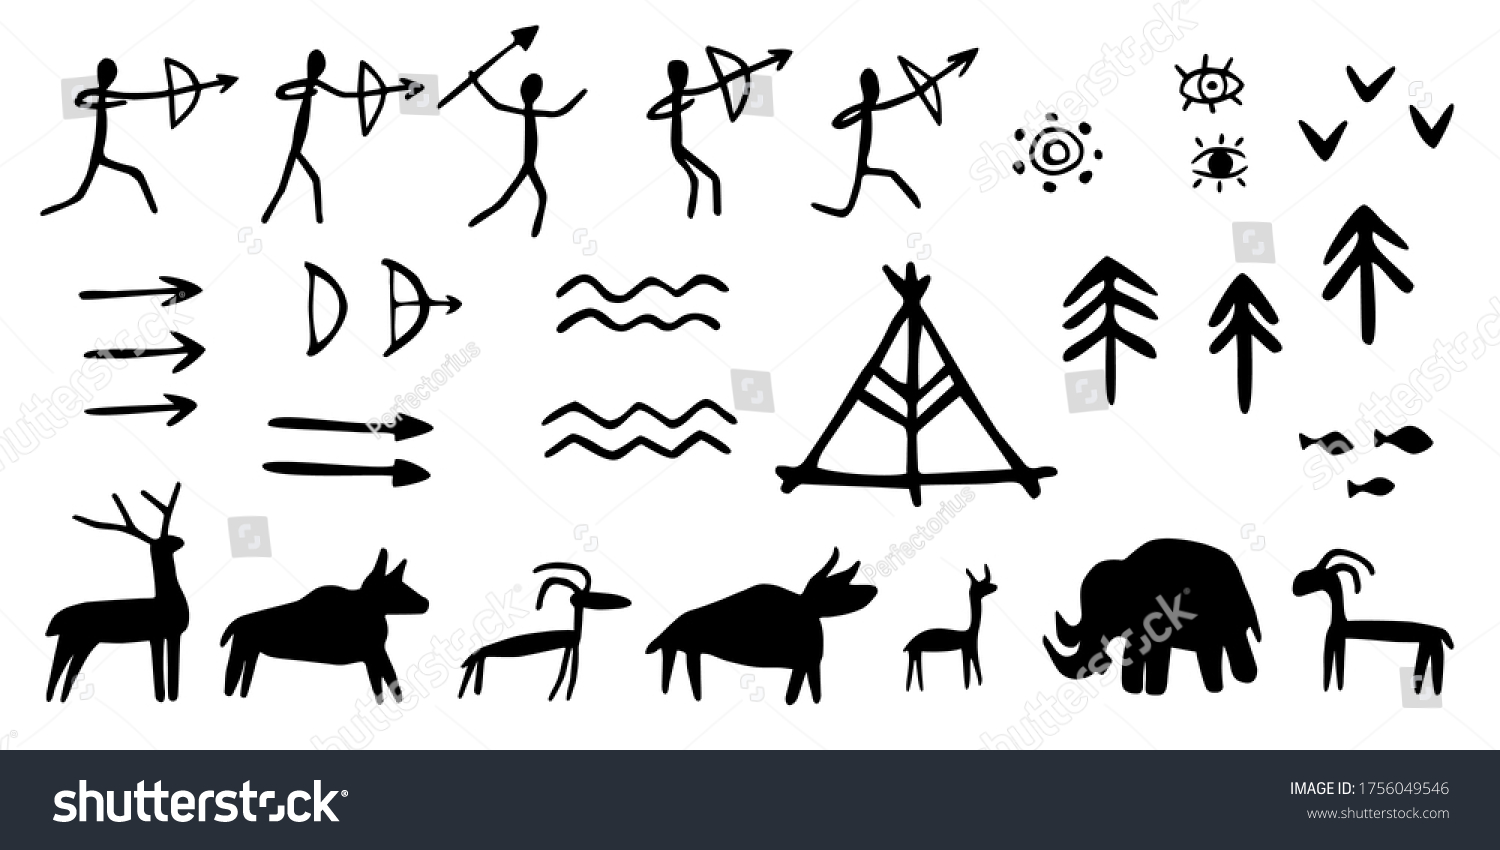 Stock Vector Vector Set Of Rock Paintings Of Prehistoric Humans Animals Weapons Cave Drawings Of Different 1756049546 